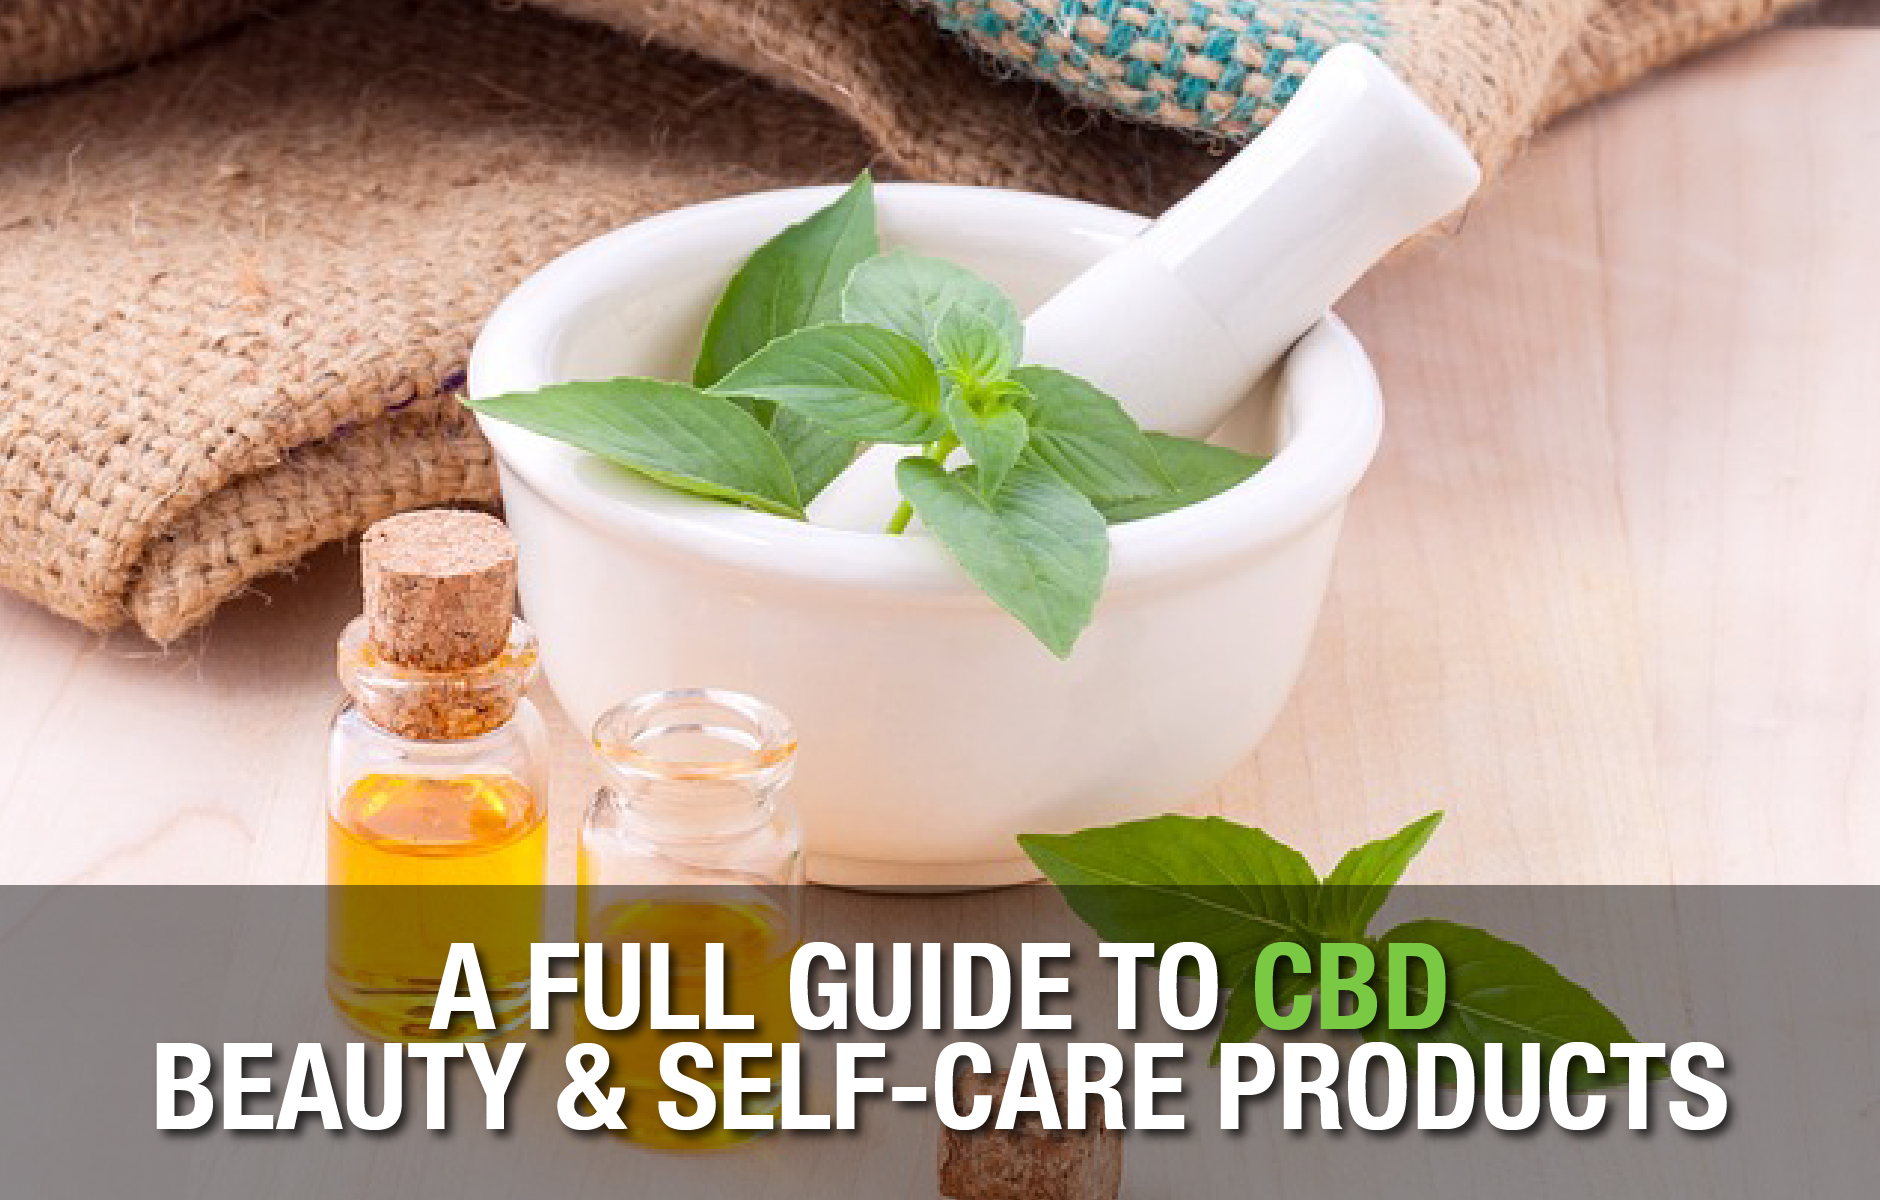 A Full Guide to CBD Beauty & Self-Care Products